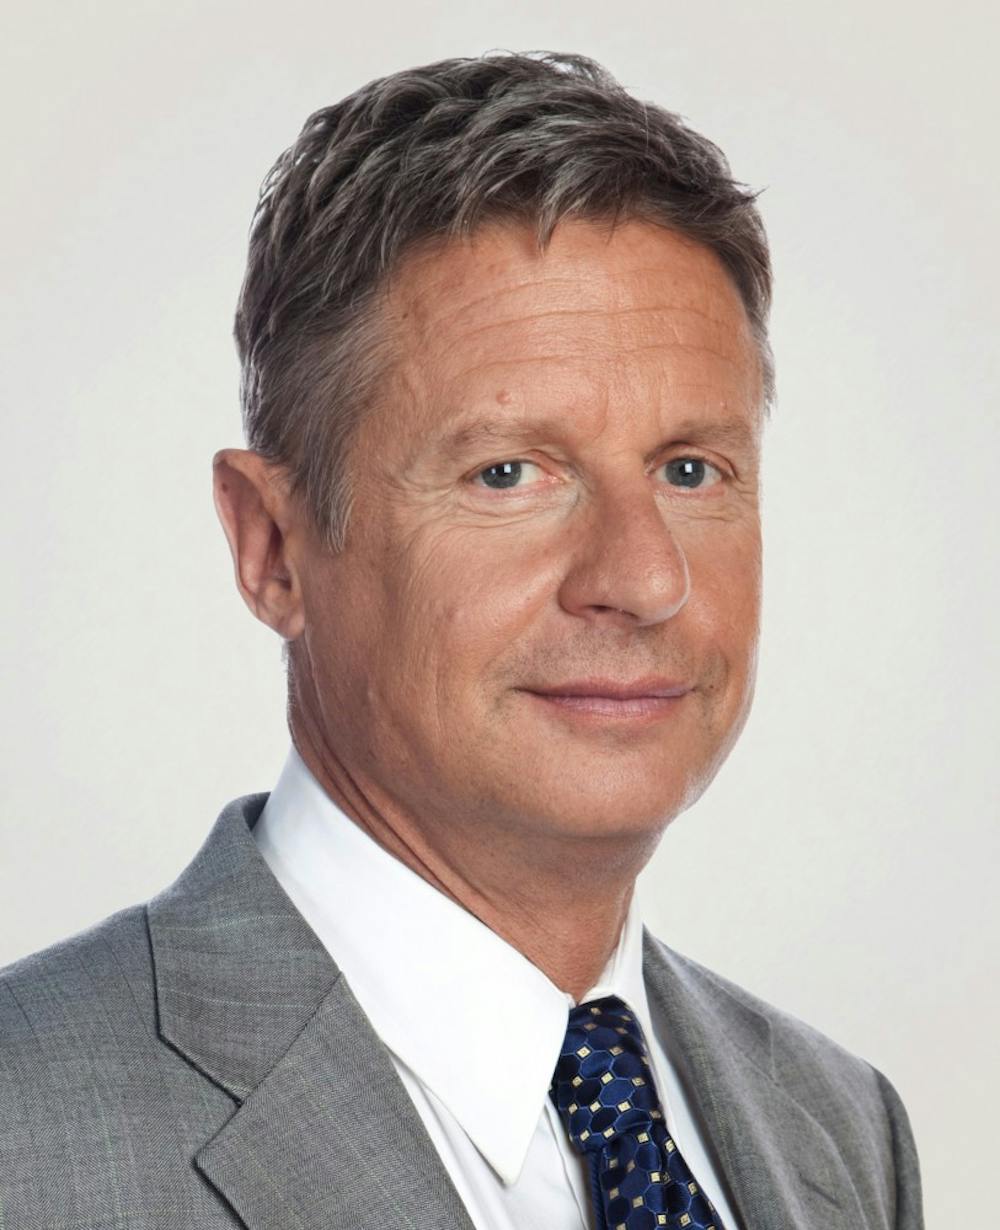 <p>Gary Johnson, a third Libertarian Party candidate, has said he is running in the 2016 presidential race. <em>PHOTO COURTESY OF WIKIPEDIA.ORG</em></p>